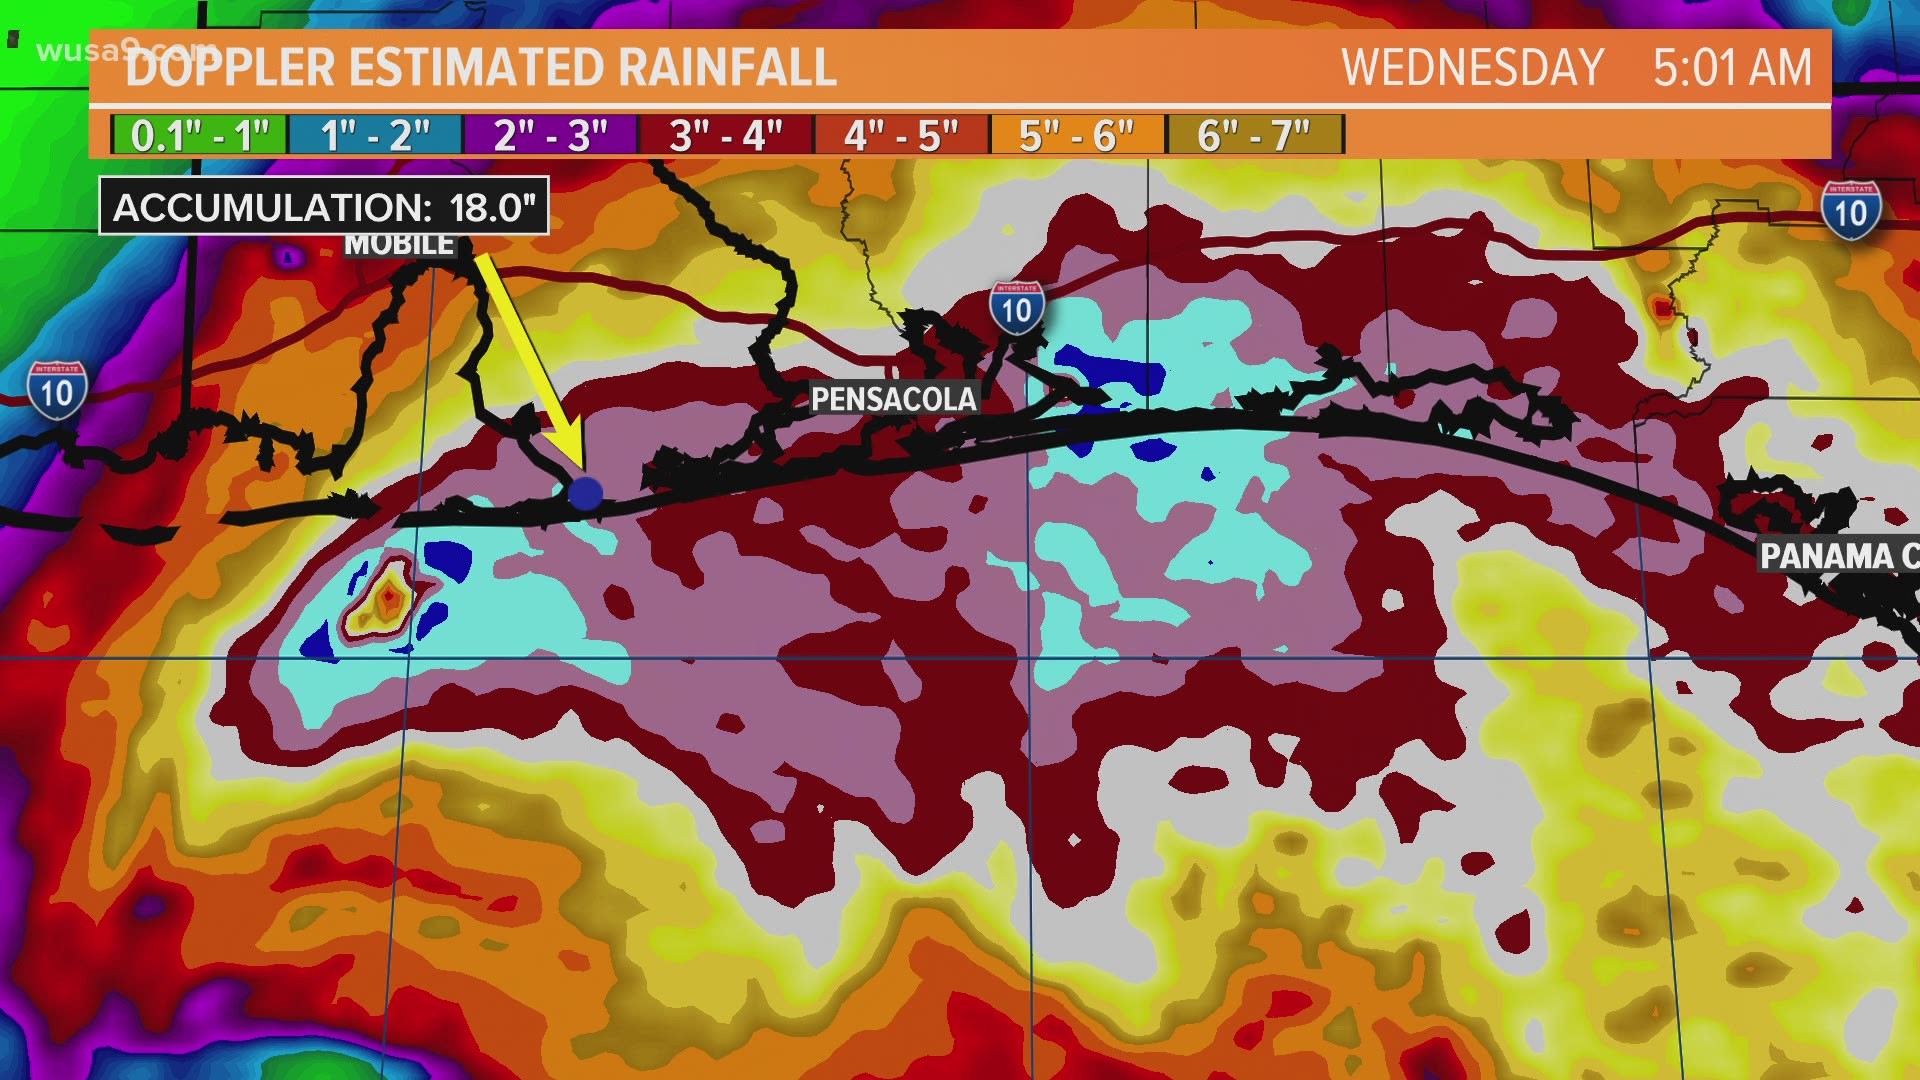 Heavy rains and a large storm surge are possible for parts of the Gulf Coast. This season is already the second busiest tropical season on record.